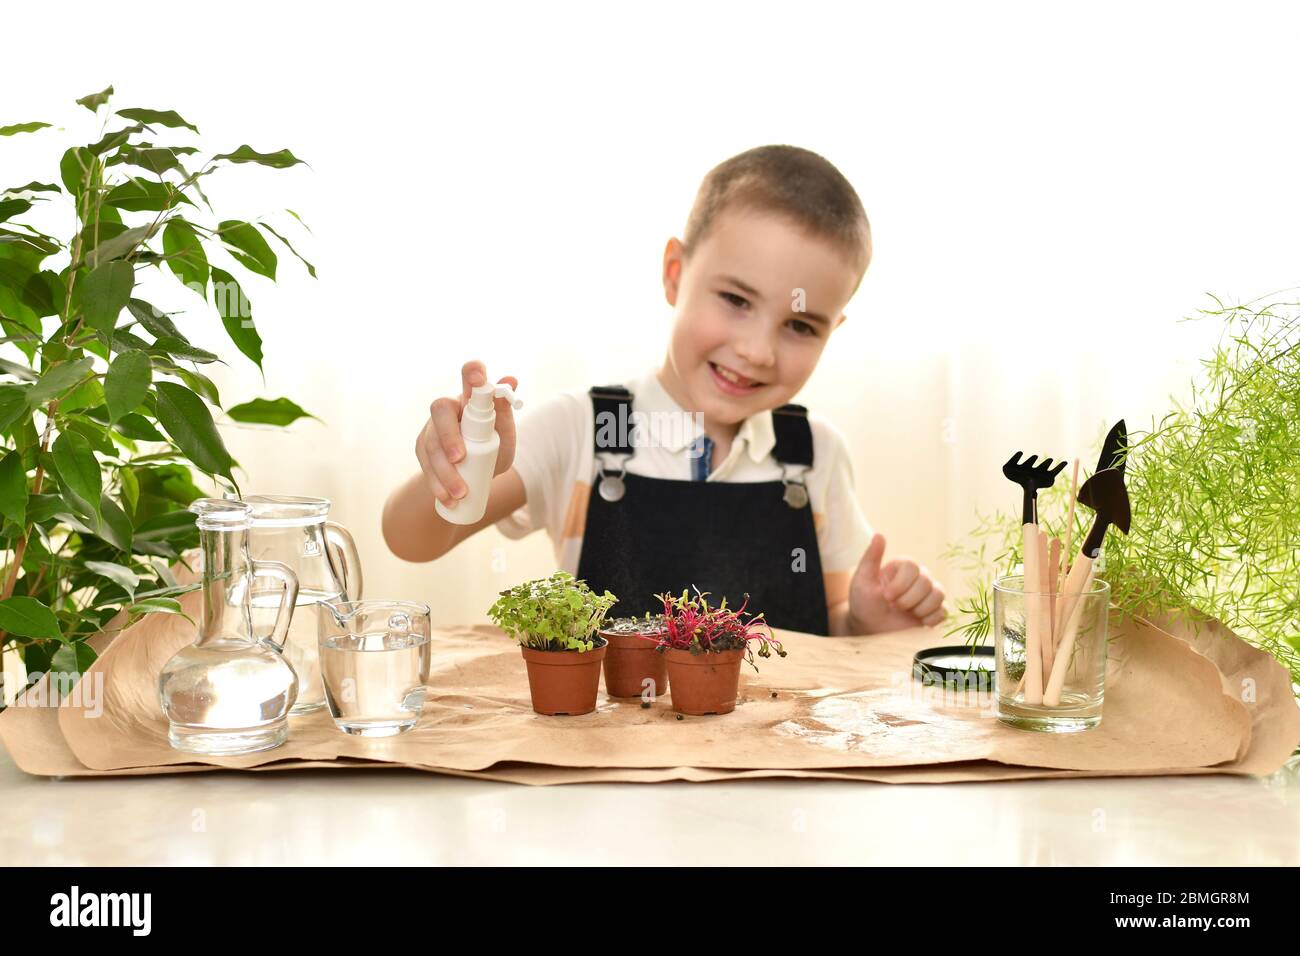 The smiling kid took aim at the spray. Care for micro greens in pots. Spraying from a spray bottle. Stock Photo